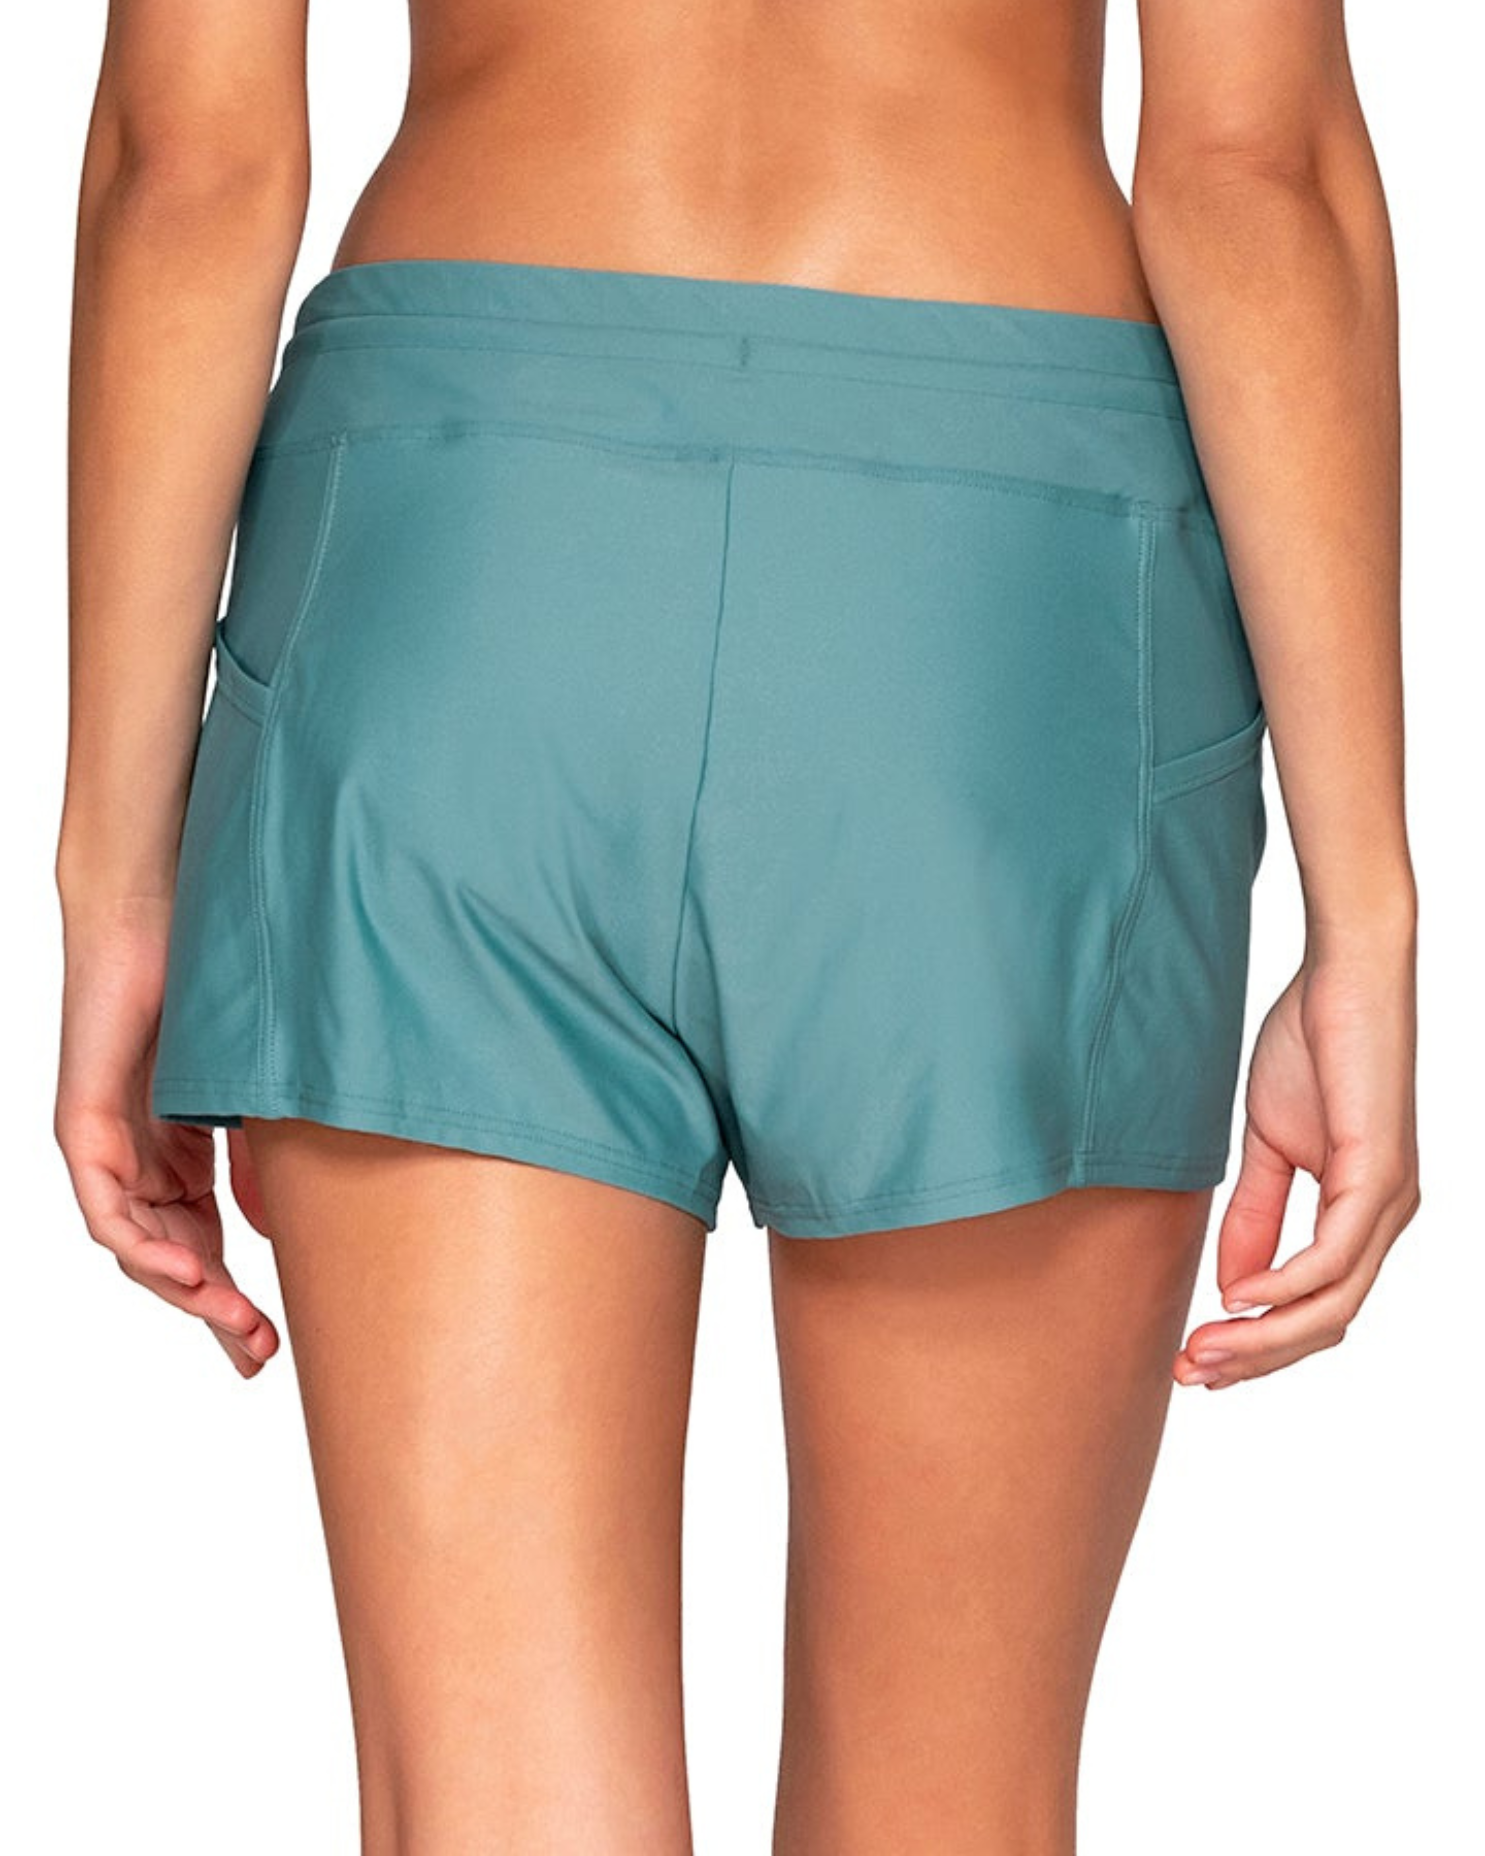 Model wearing a swim short with side pocket in pale turquoise